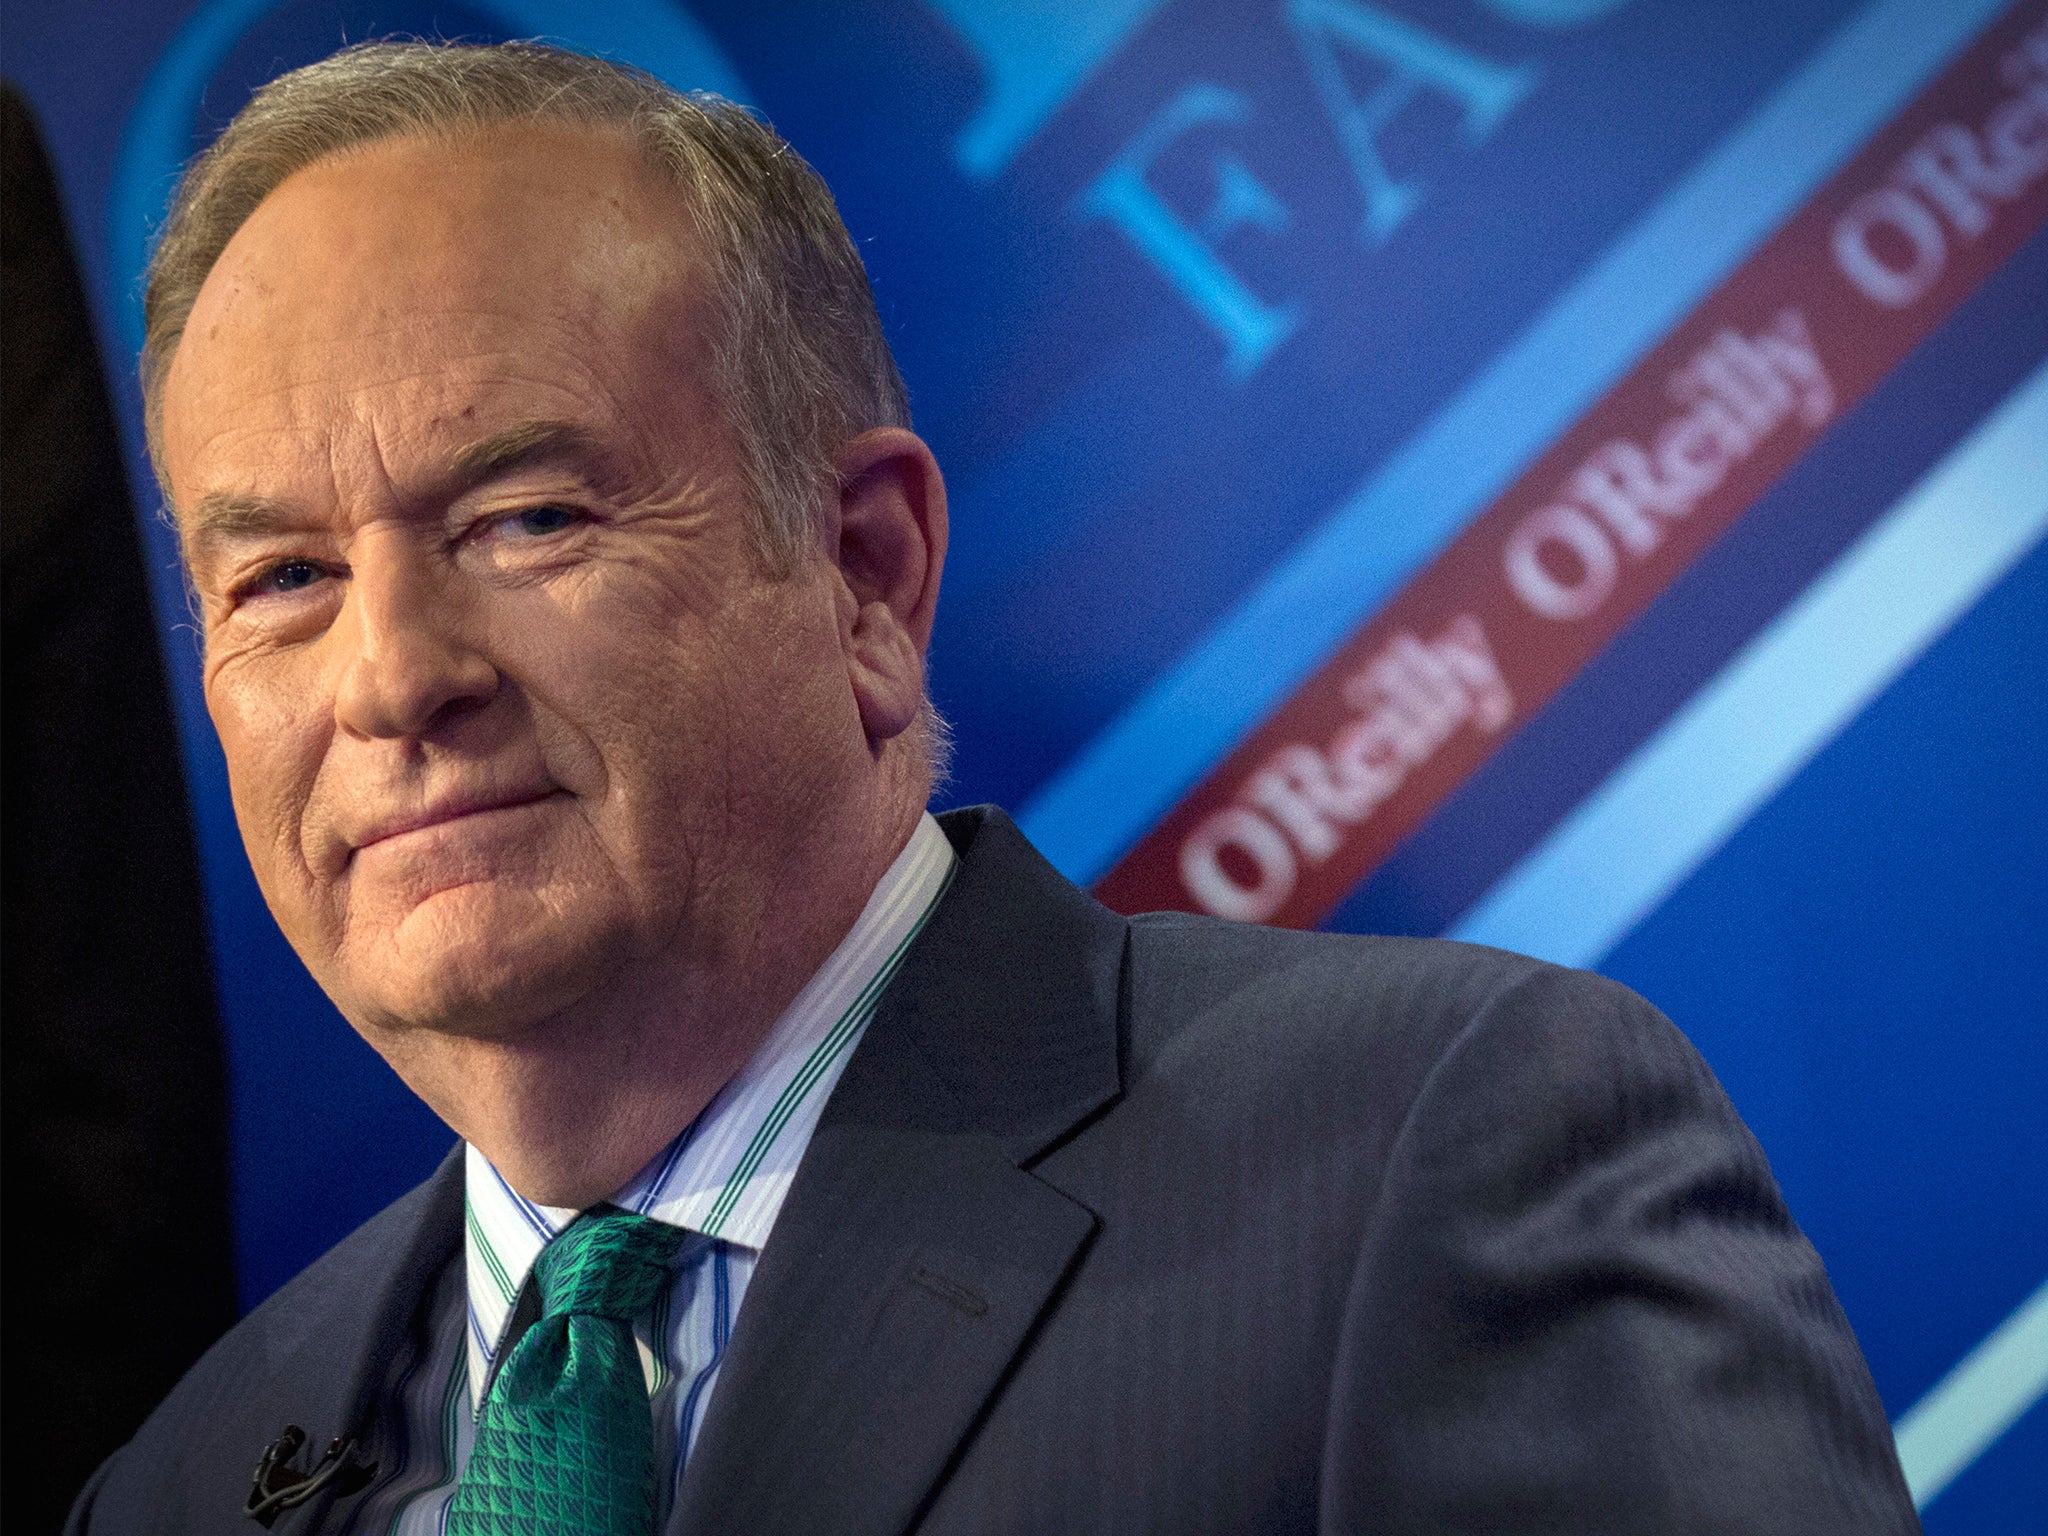 O’Reilly has repeatedly denied the allegations of sexual harassment and inappropriate behaviour and insisted he is a target for such accusations due to his wealth and fame